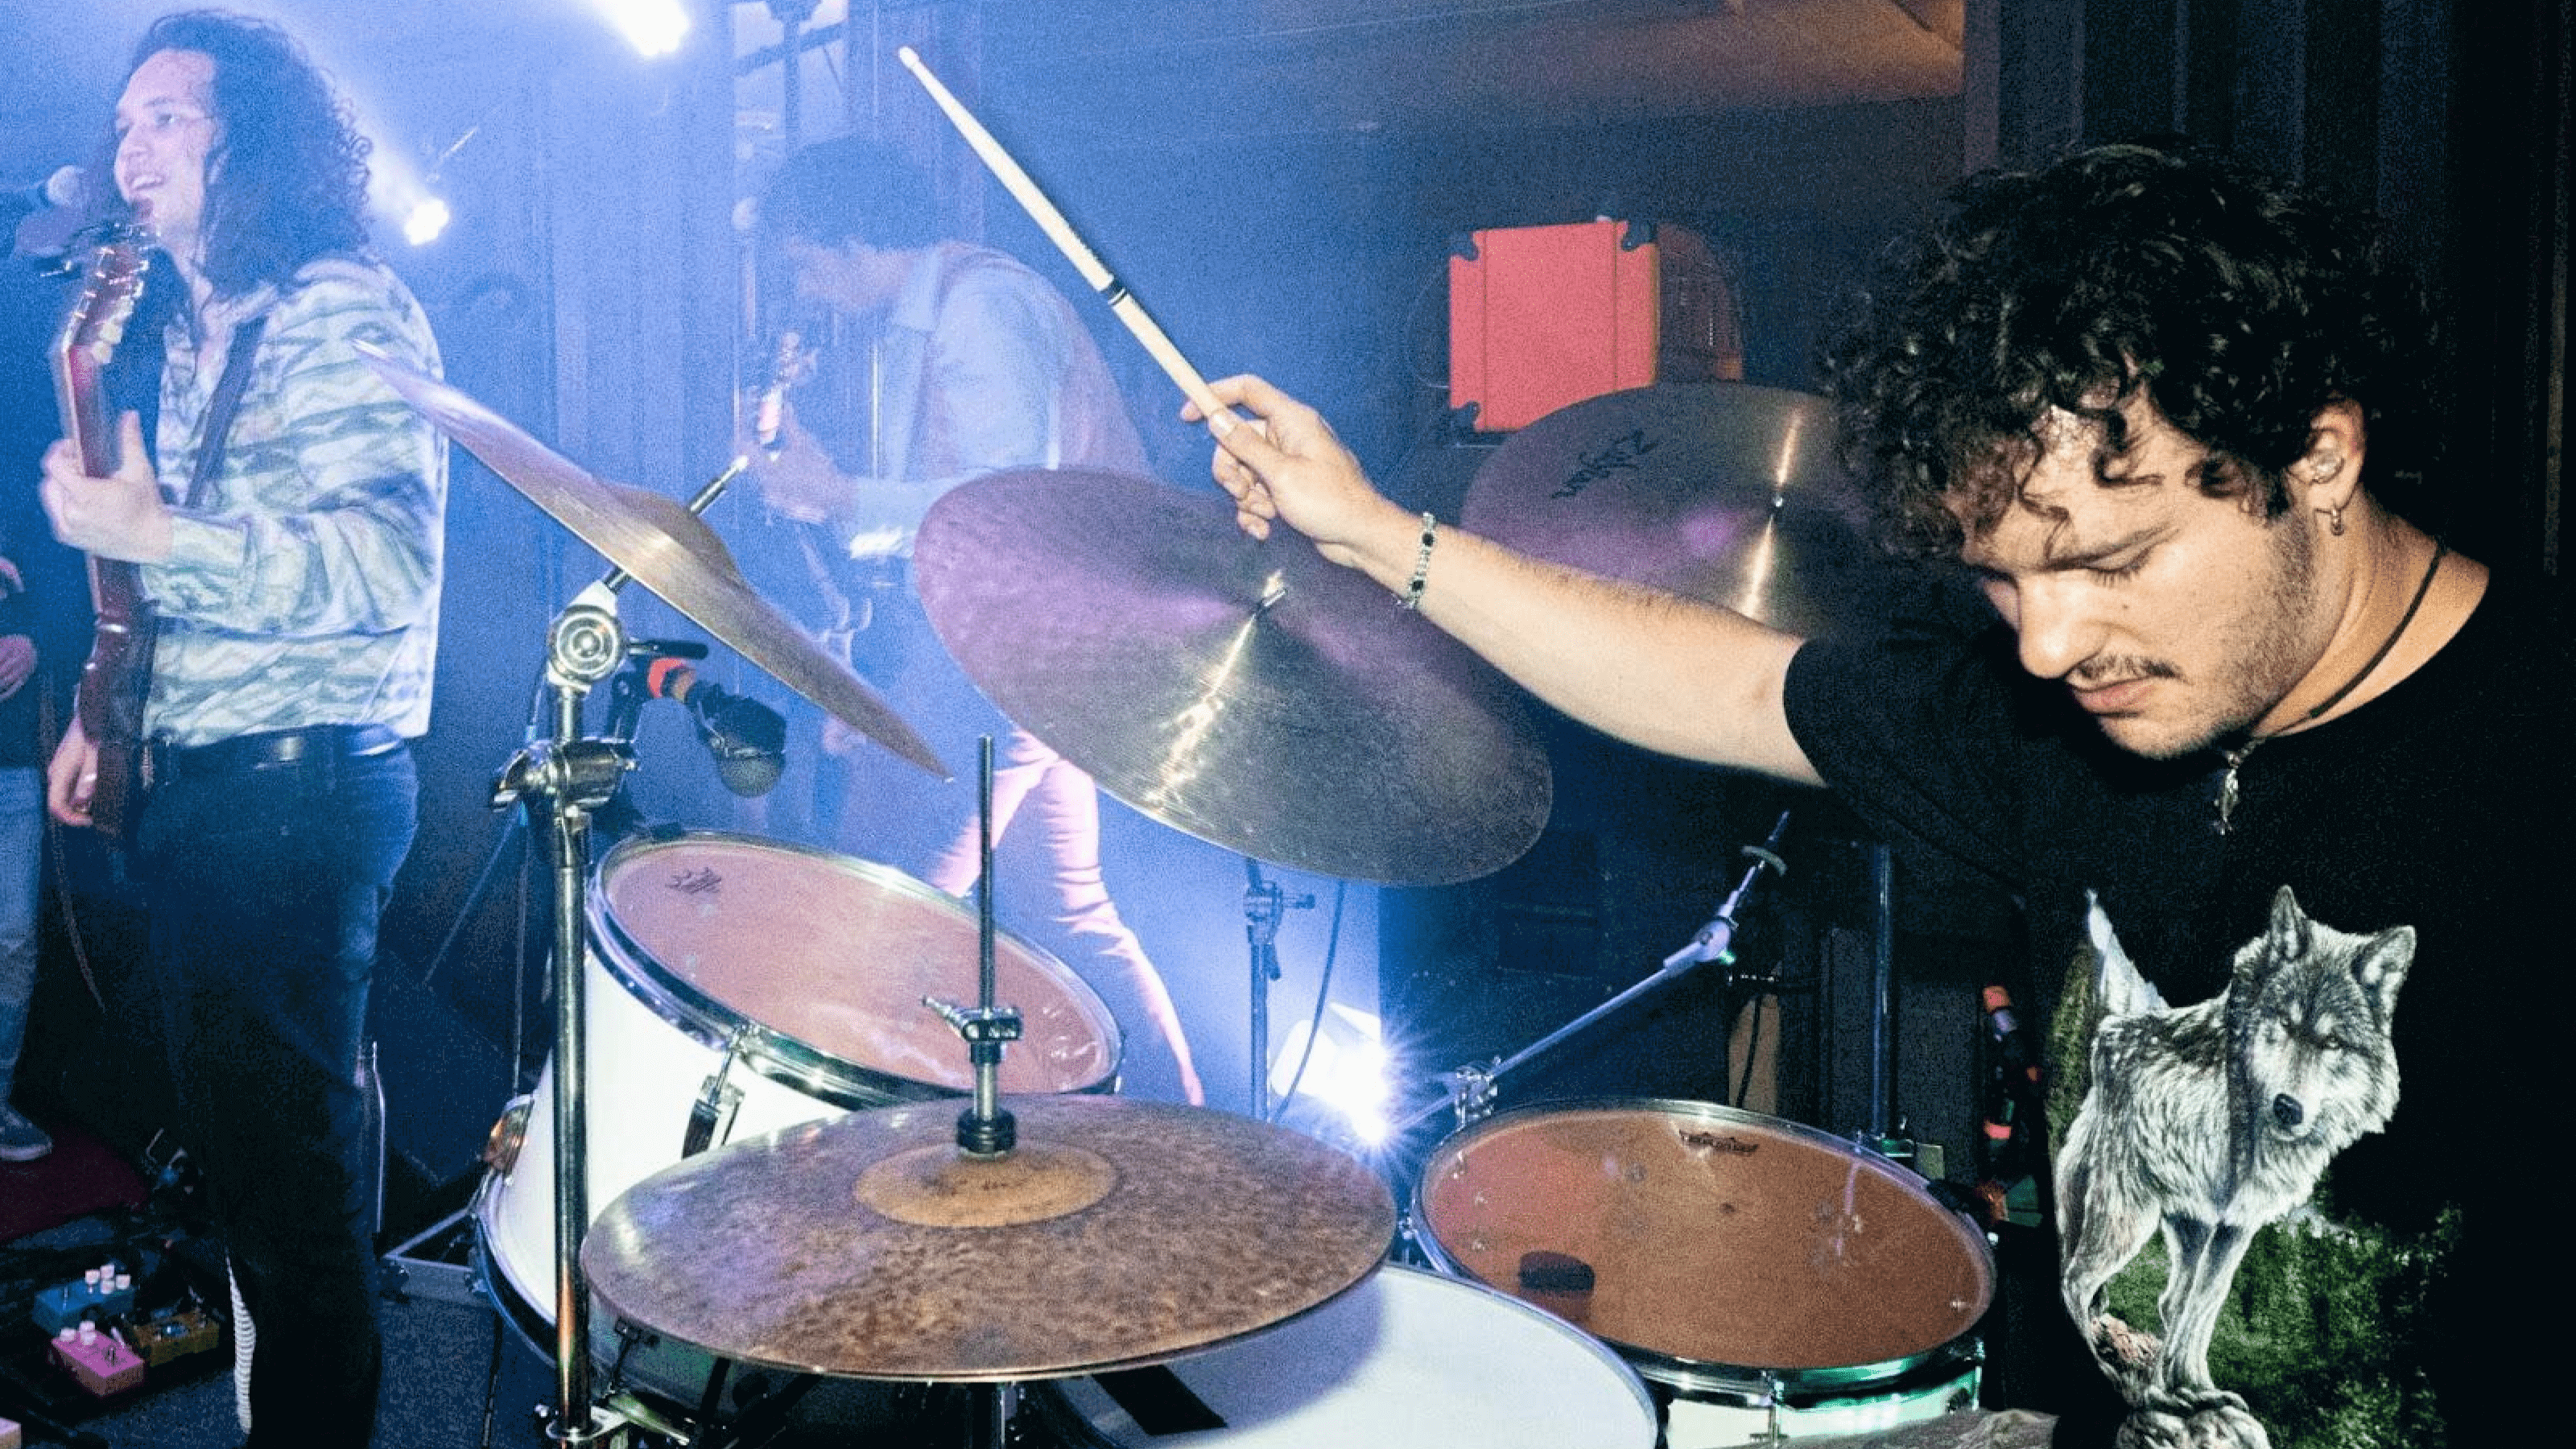 Band members playing at an experiential marketing event